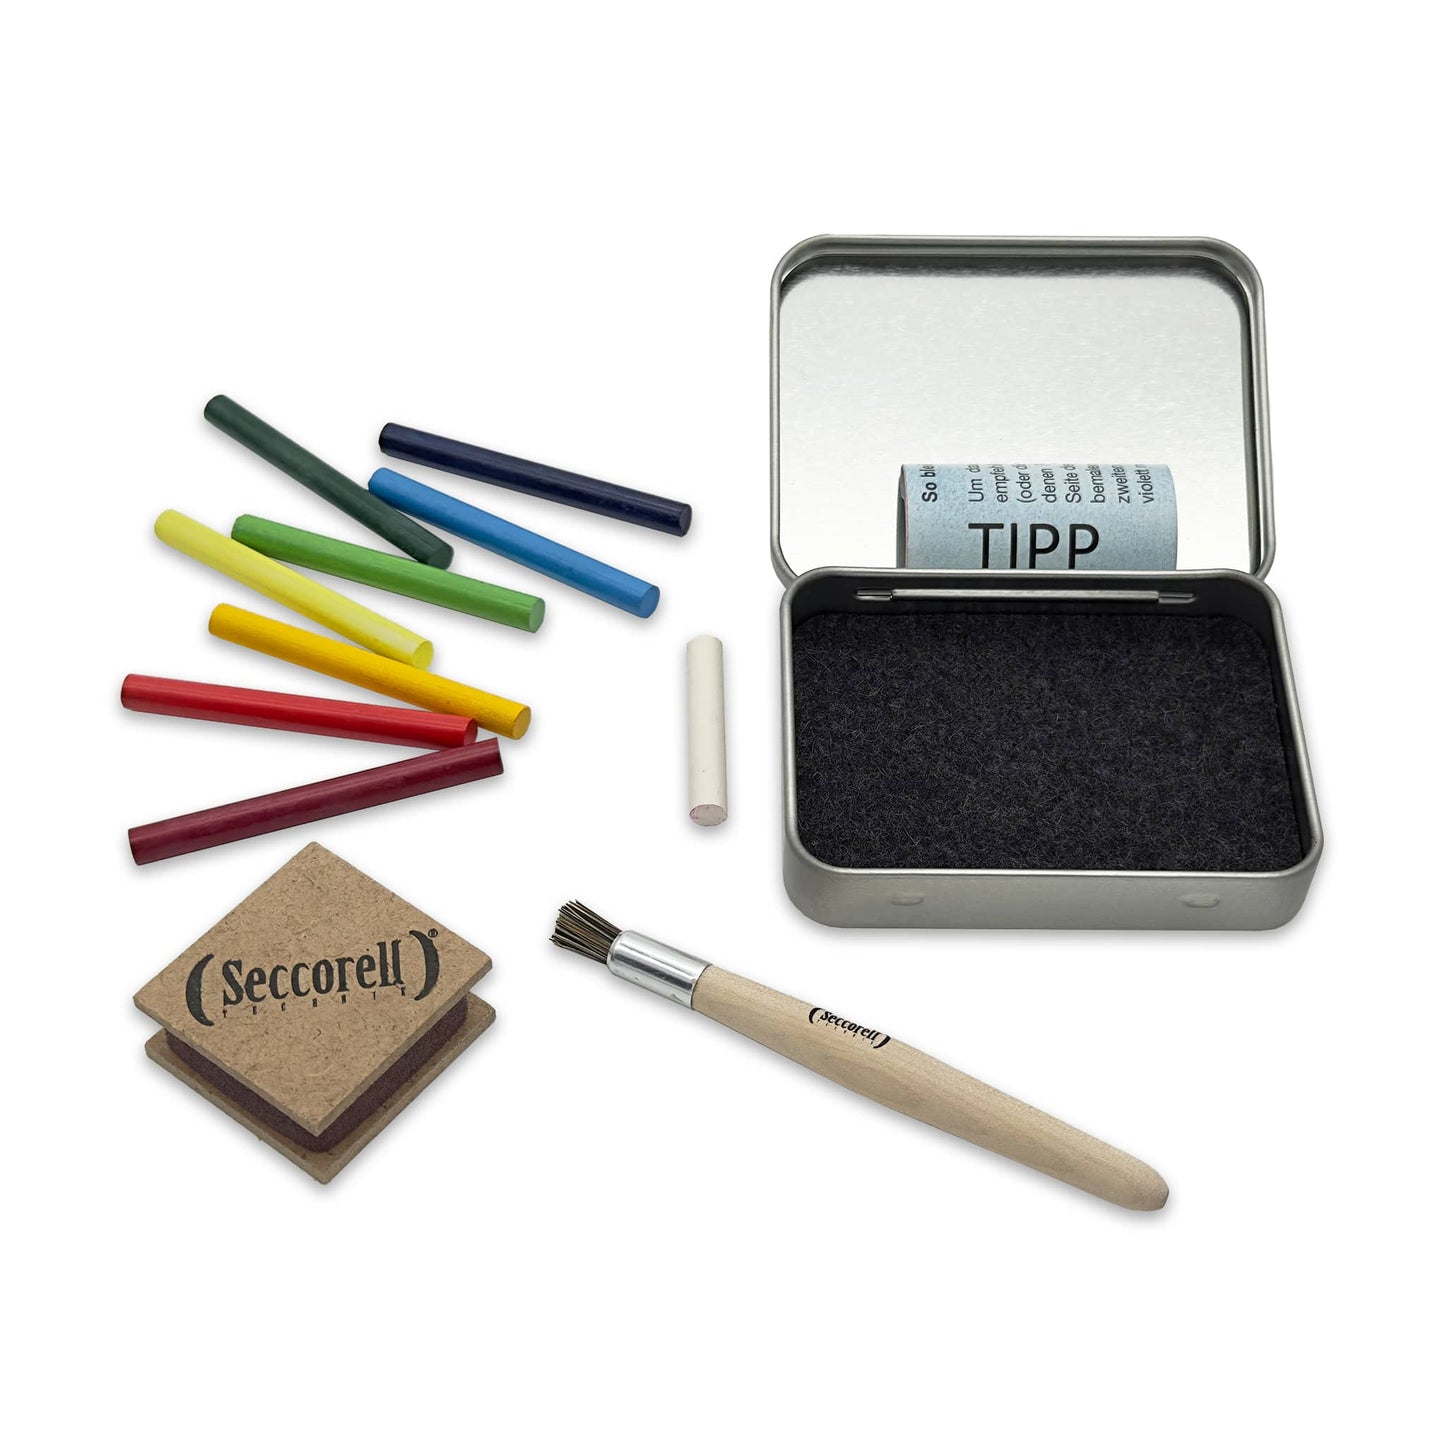 Seccorell Pocket "Hare", shows all utensils for the painting technique, including 8 paint sticks, rubbing block, cleaning brush, eraser in a practical metal box with felt insert.